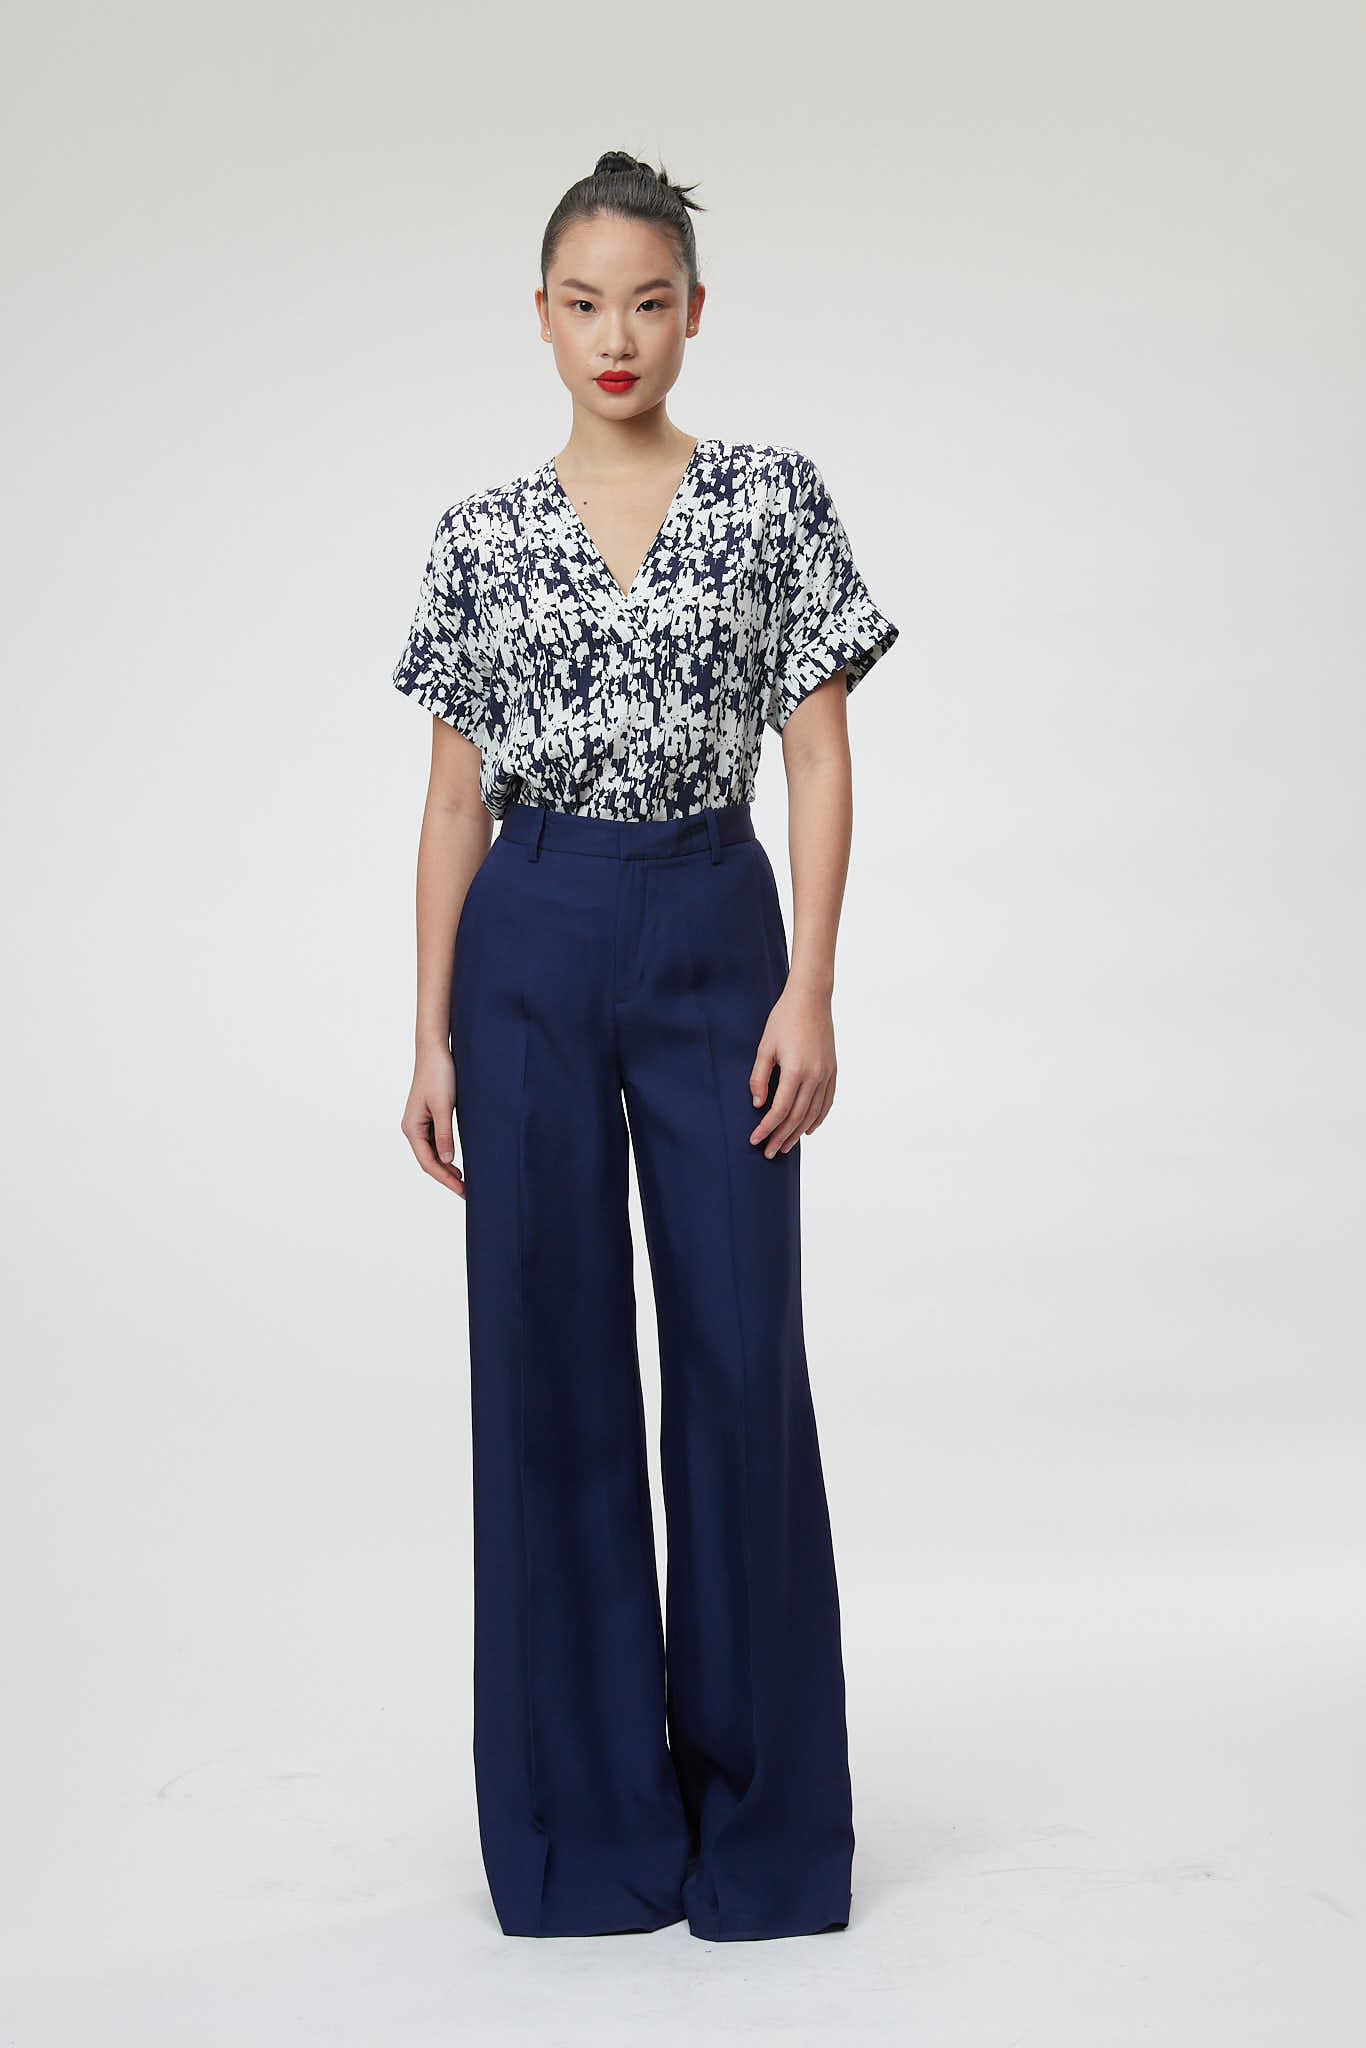 Modena Trouser – Palazzo fluid trousers in navy